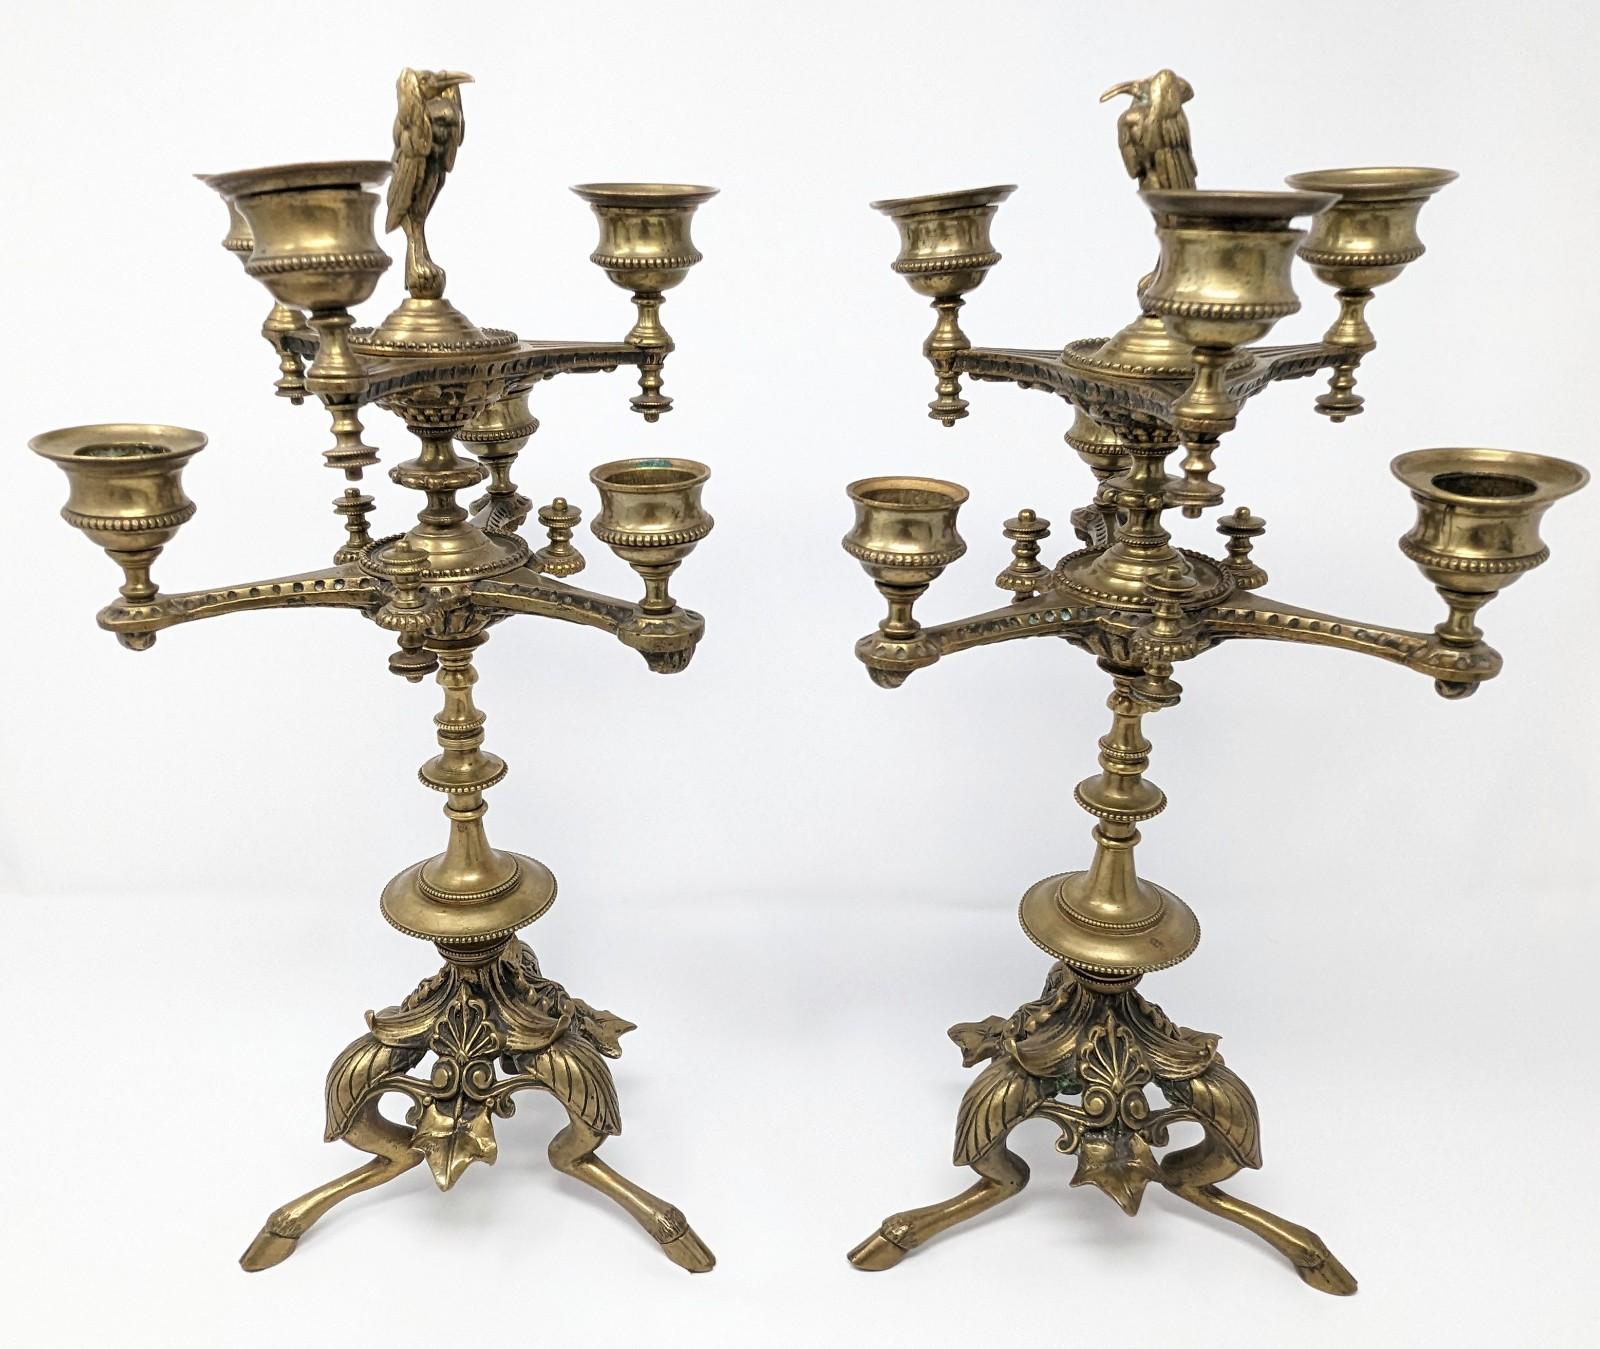 Pair of exquisite antique patinated brass candelabras with ornate fawn hoof feet and elegant bird tops. Measures 7.25 inches at its widest points by 15 inches in height. There is a hint of a makers mark on one of them as photographed, however we are